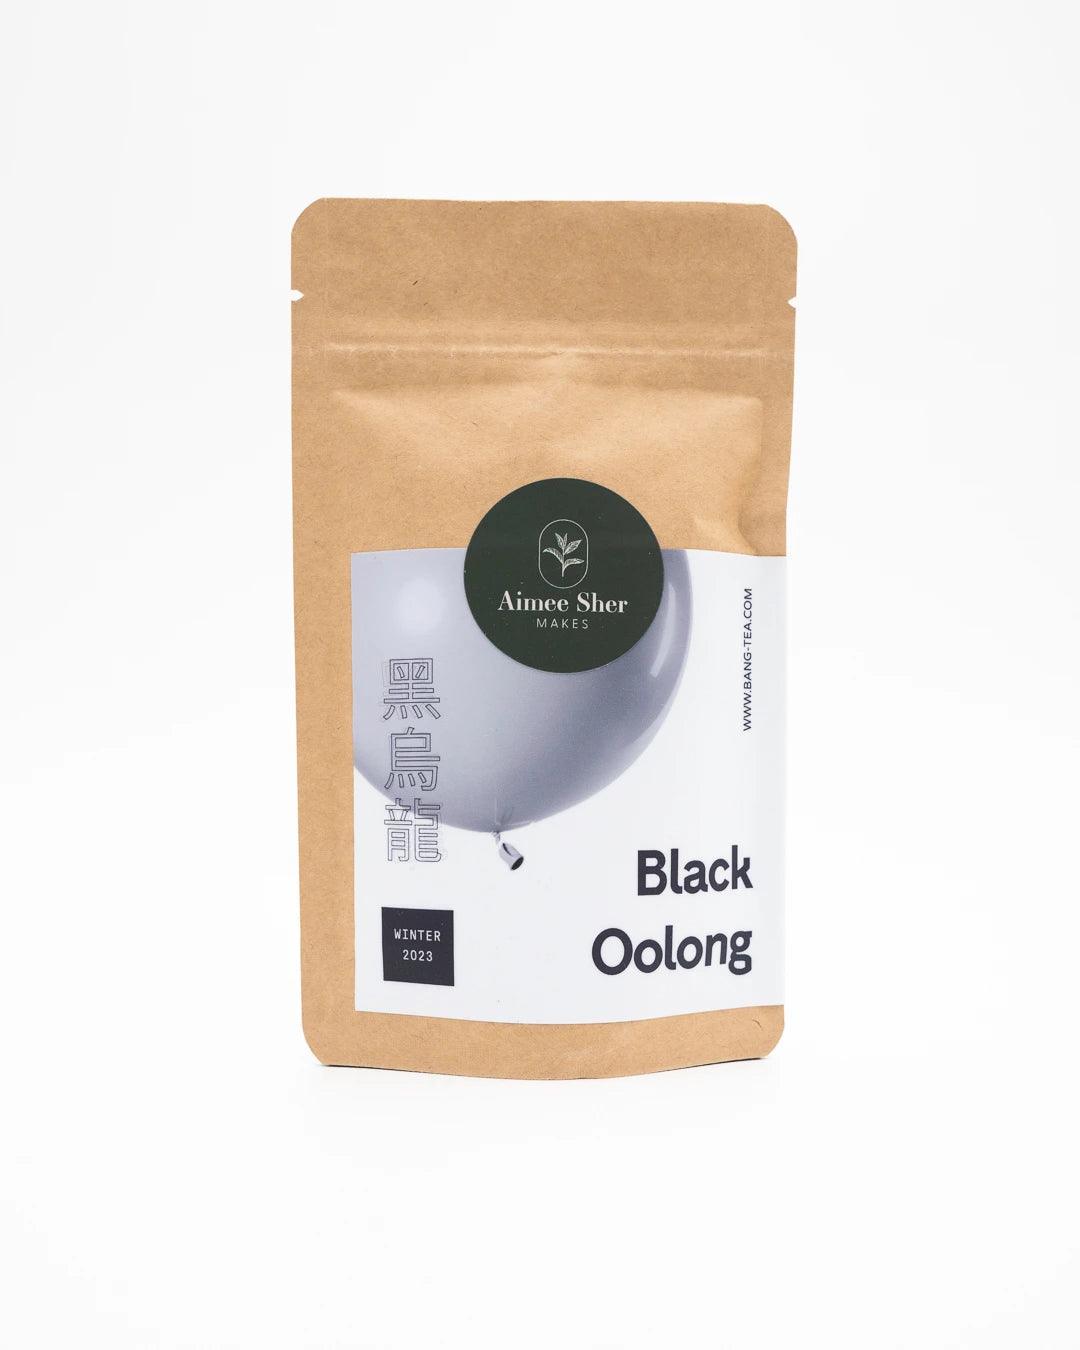 Black Oolong (Winter 2023) - Aimee Sher Makes